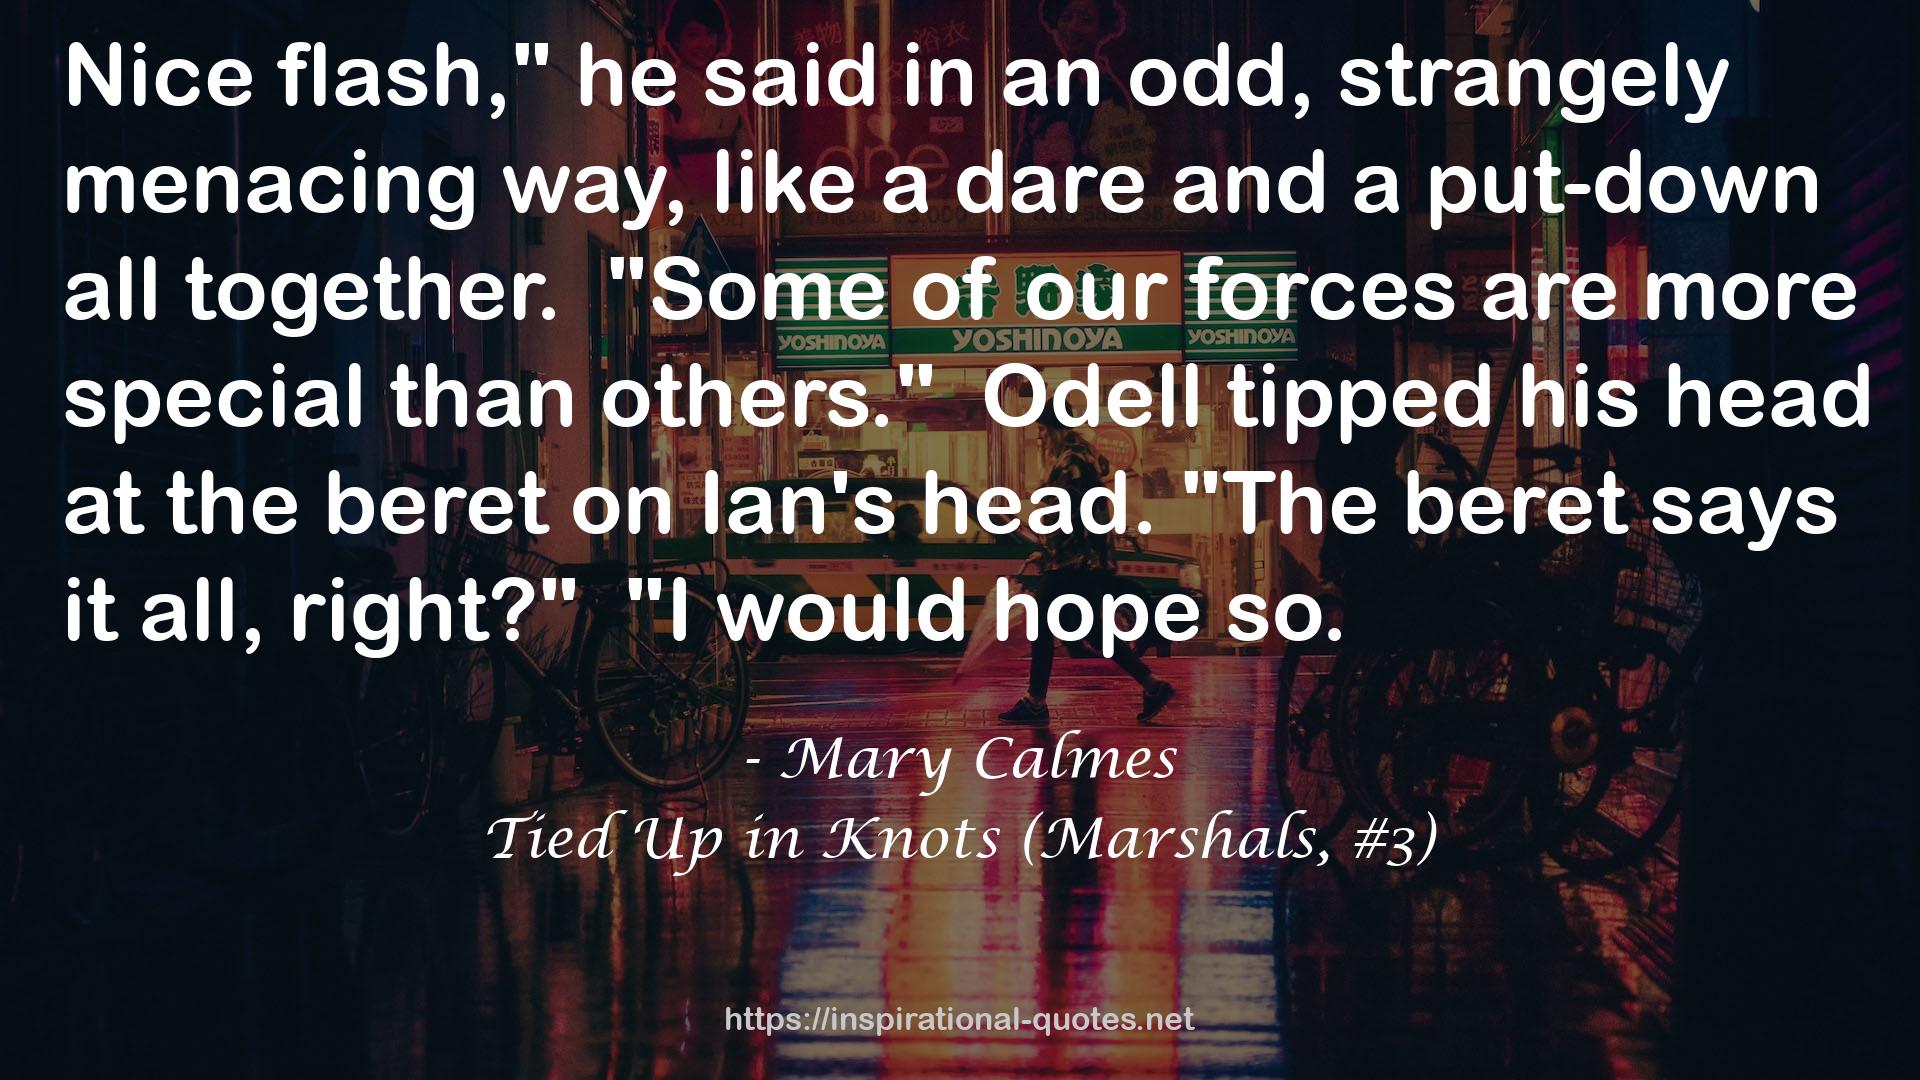 Tied Up in Knots (Marshals, #3) QUOTES